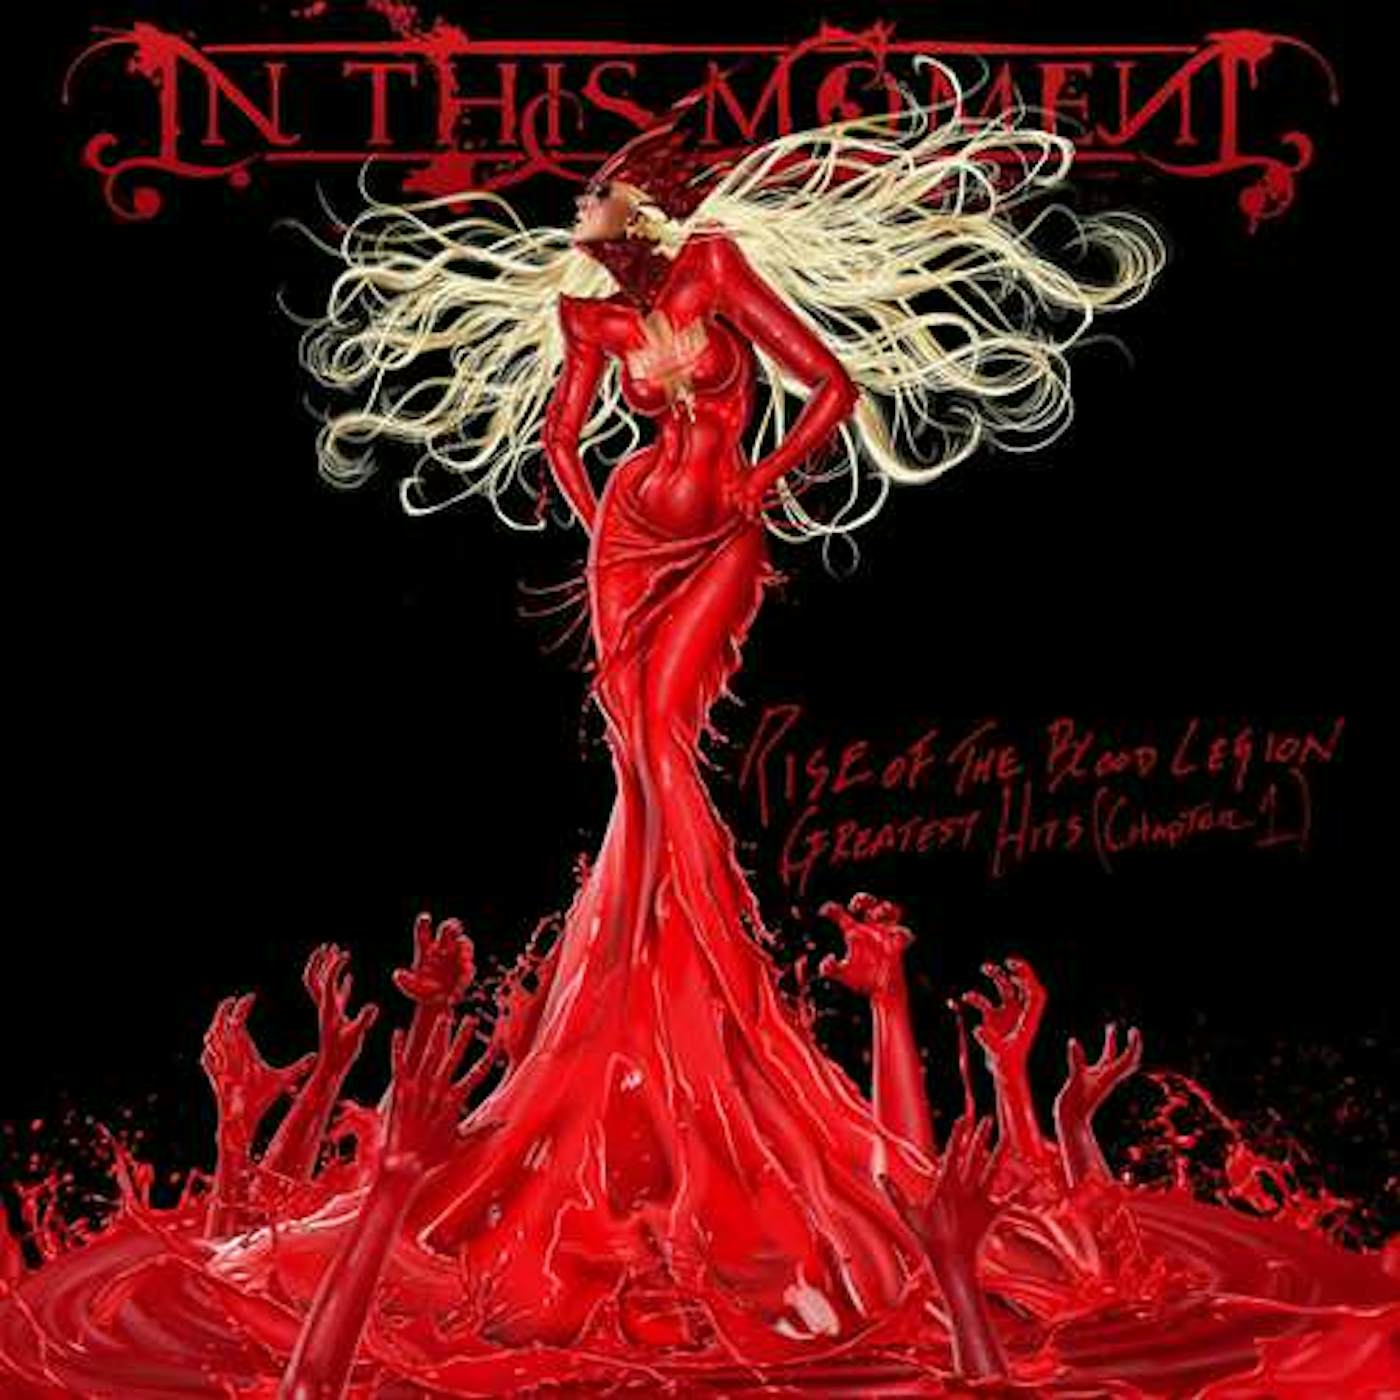 In This Moment RISE OF THE BLOOD LEGION-GREATEST HITS (CHAPTER 1) CD